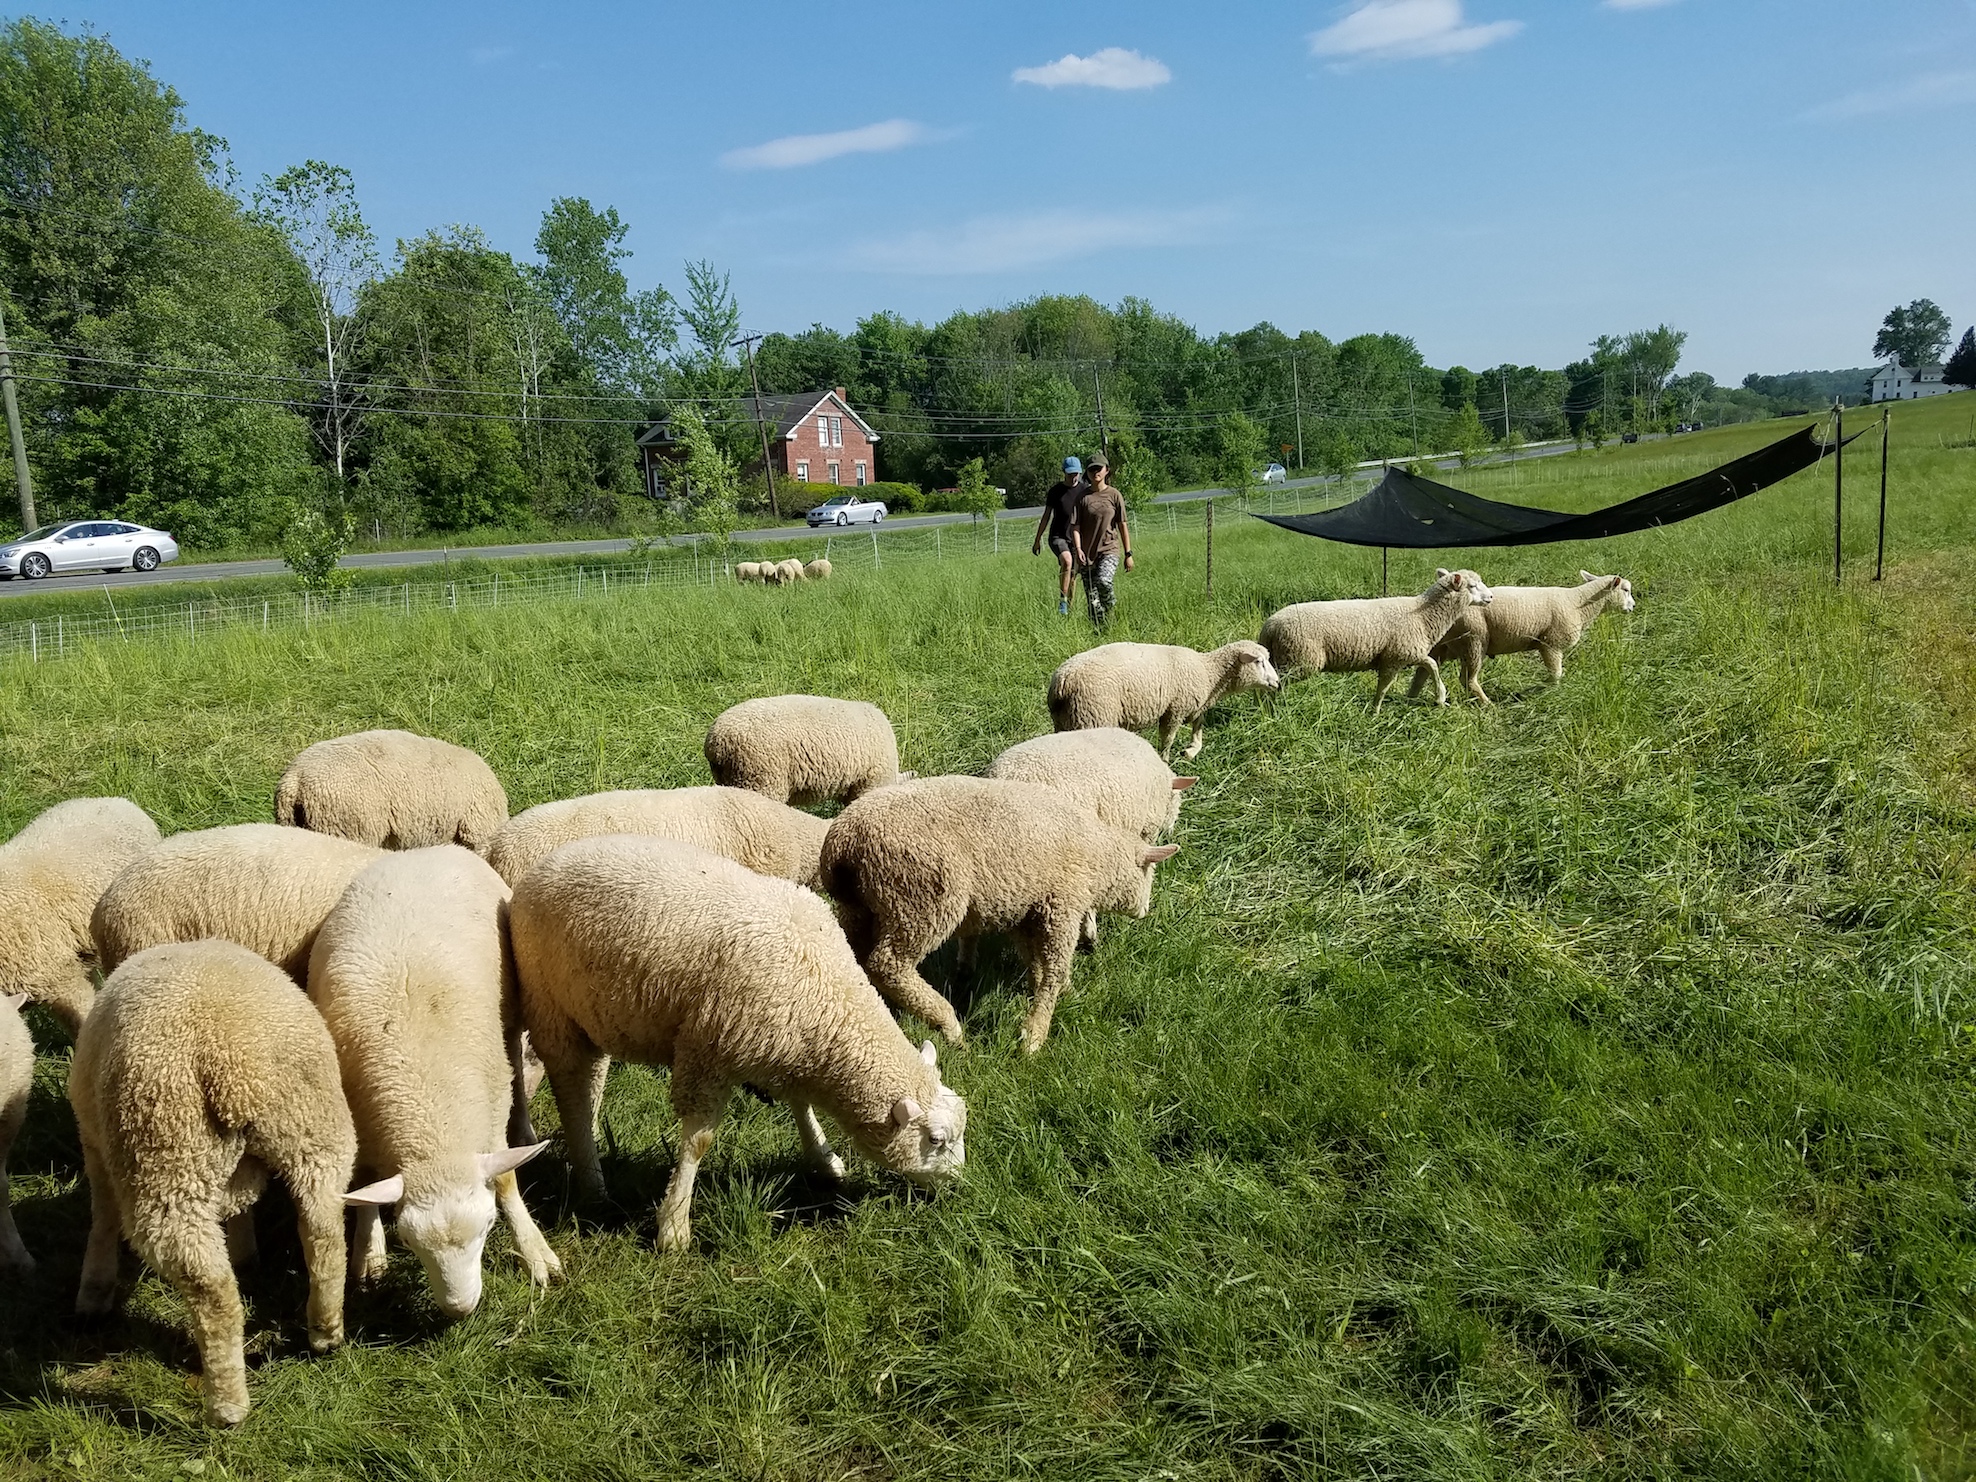 Flock of lambs in foreground with two students walking towards them